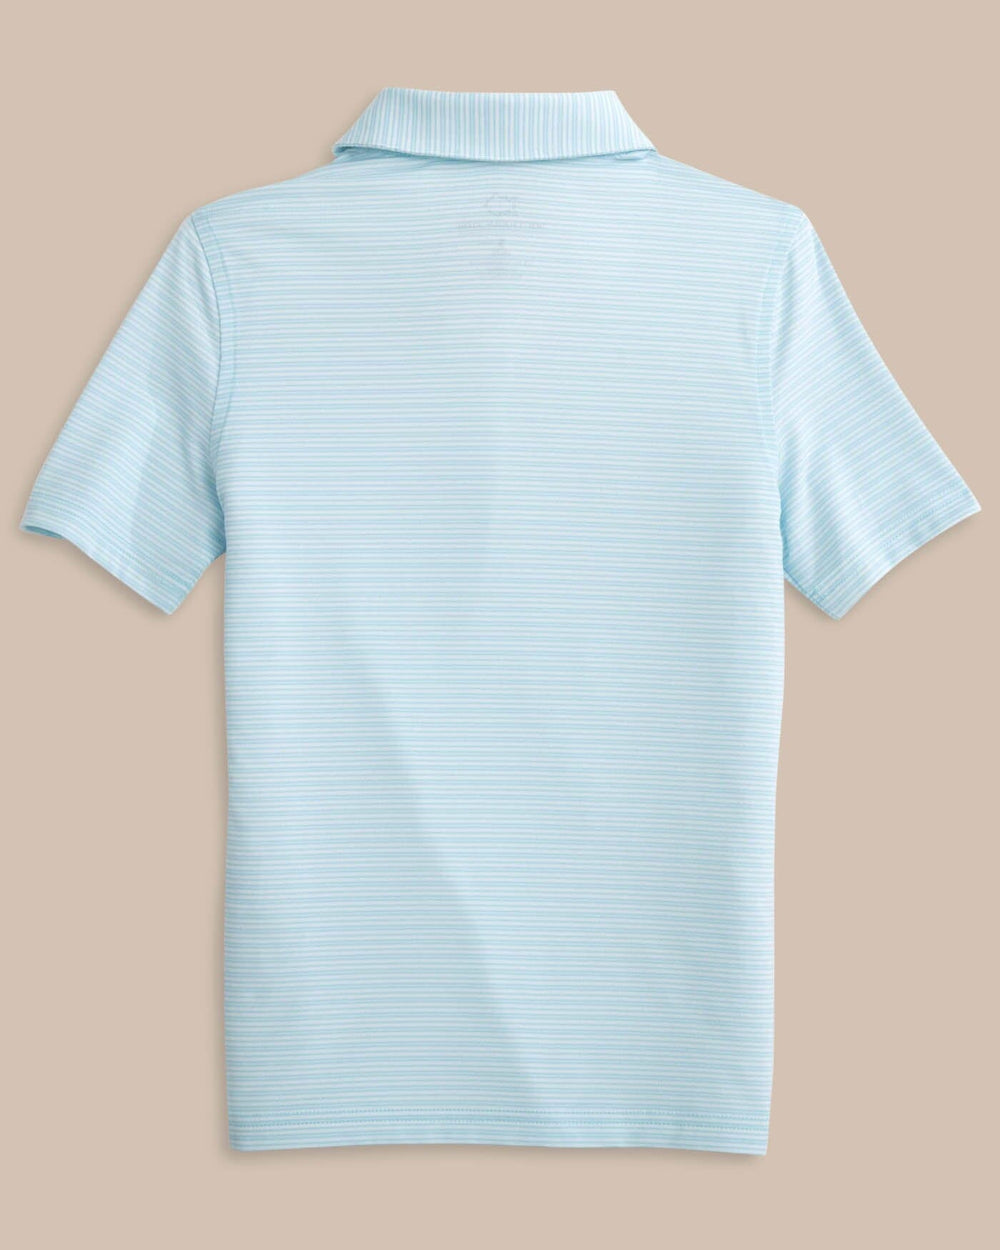 The back view of the Southern Tide Boys Driver Camden Stripe Performance Polo by Southern Tide - Dream Blue